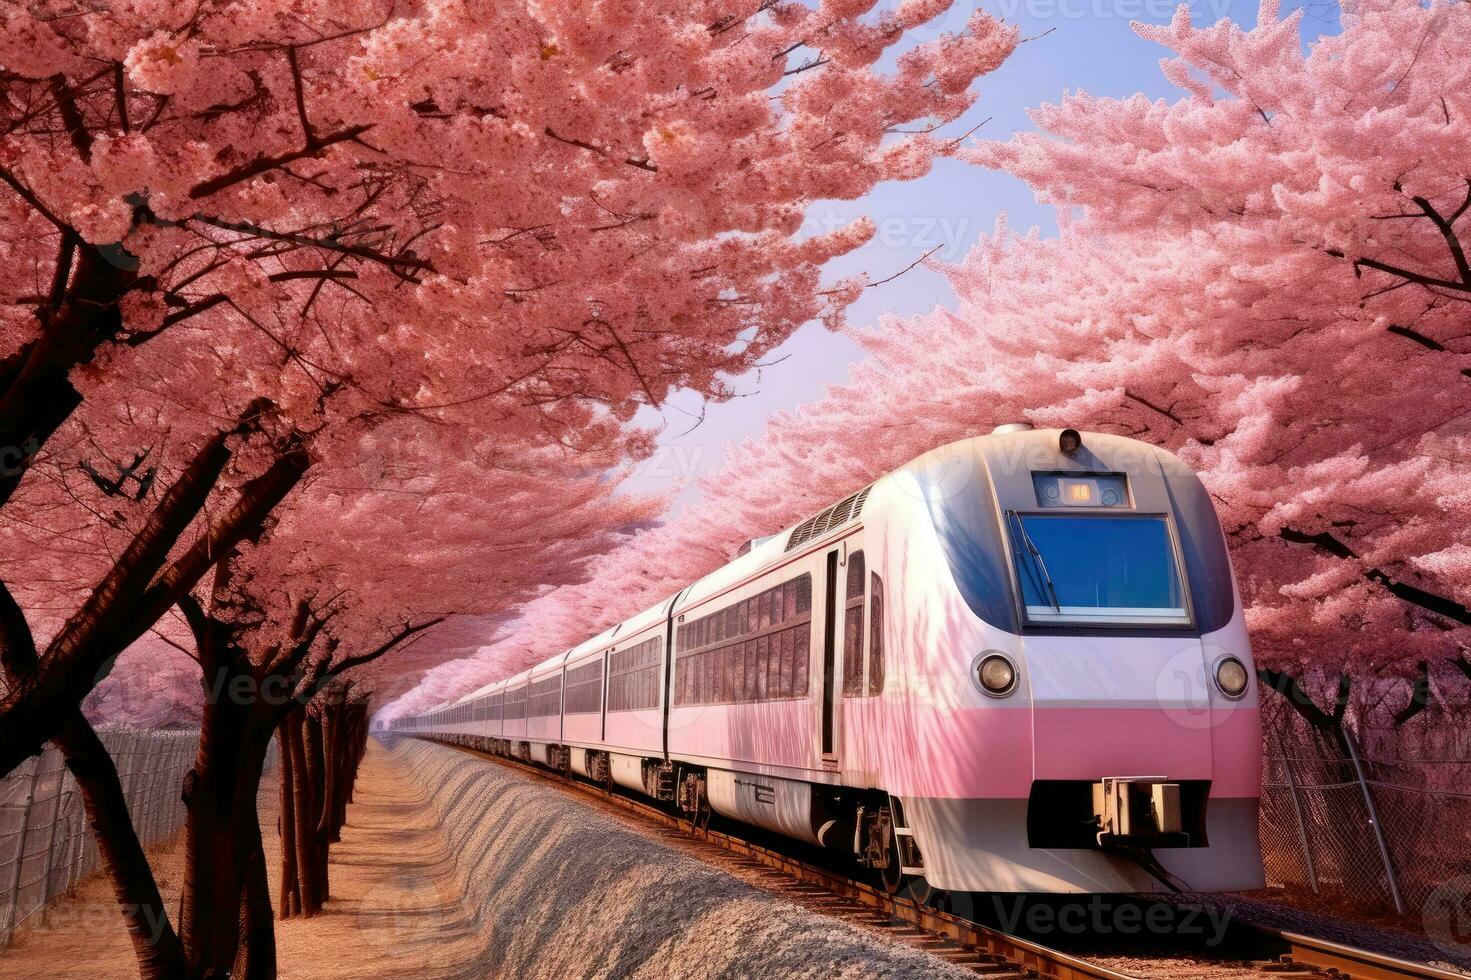 Railway in Beijing, China, train near cherry blossoms in spring photo